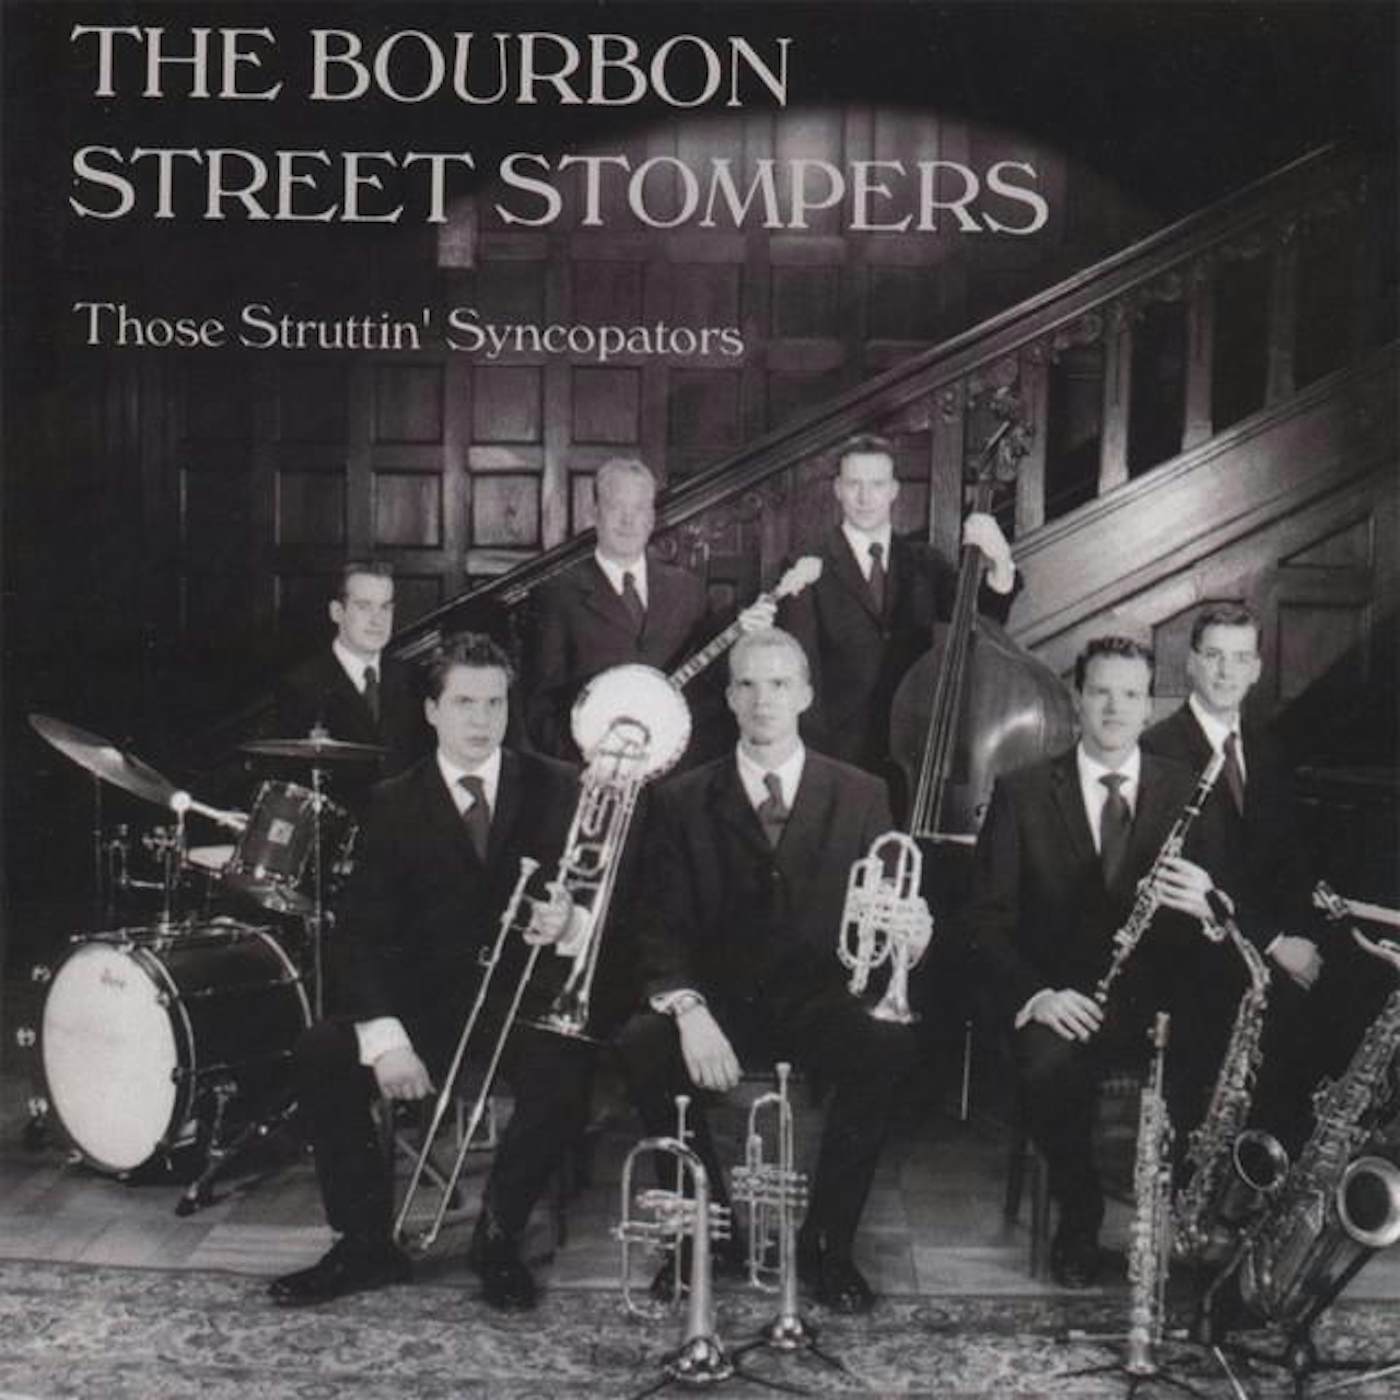 The Bourbon Street Stompers